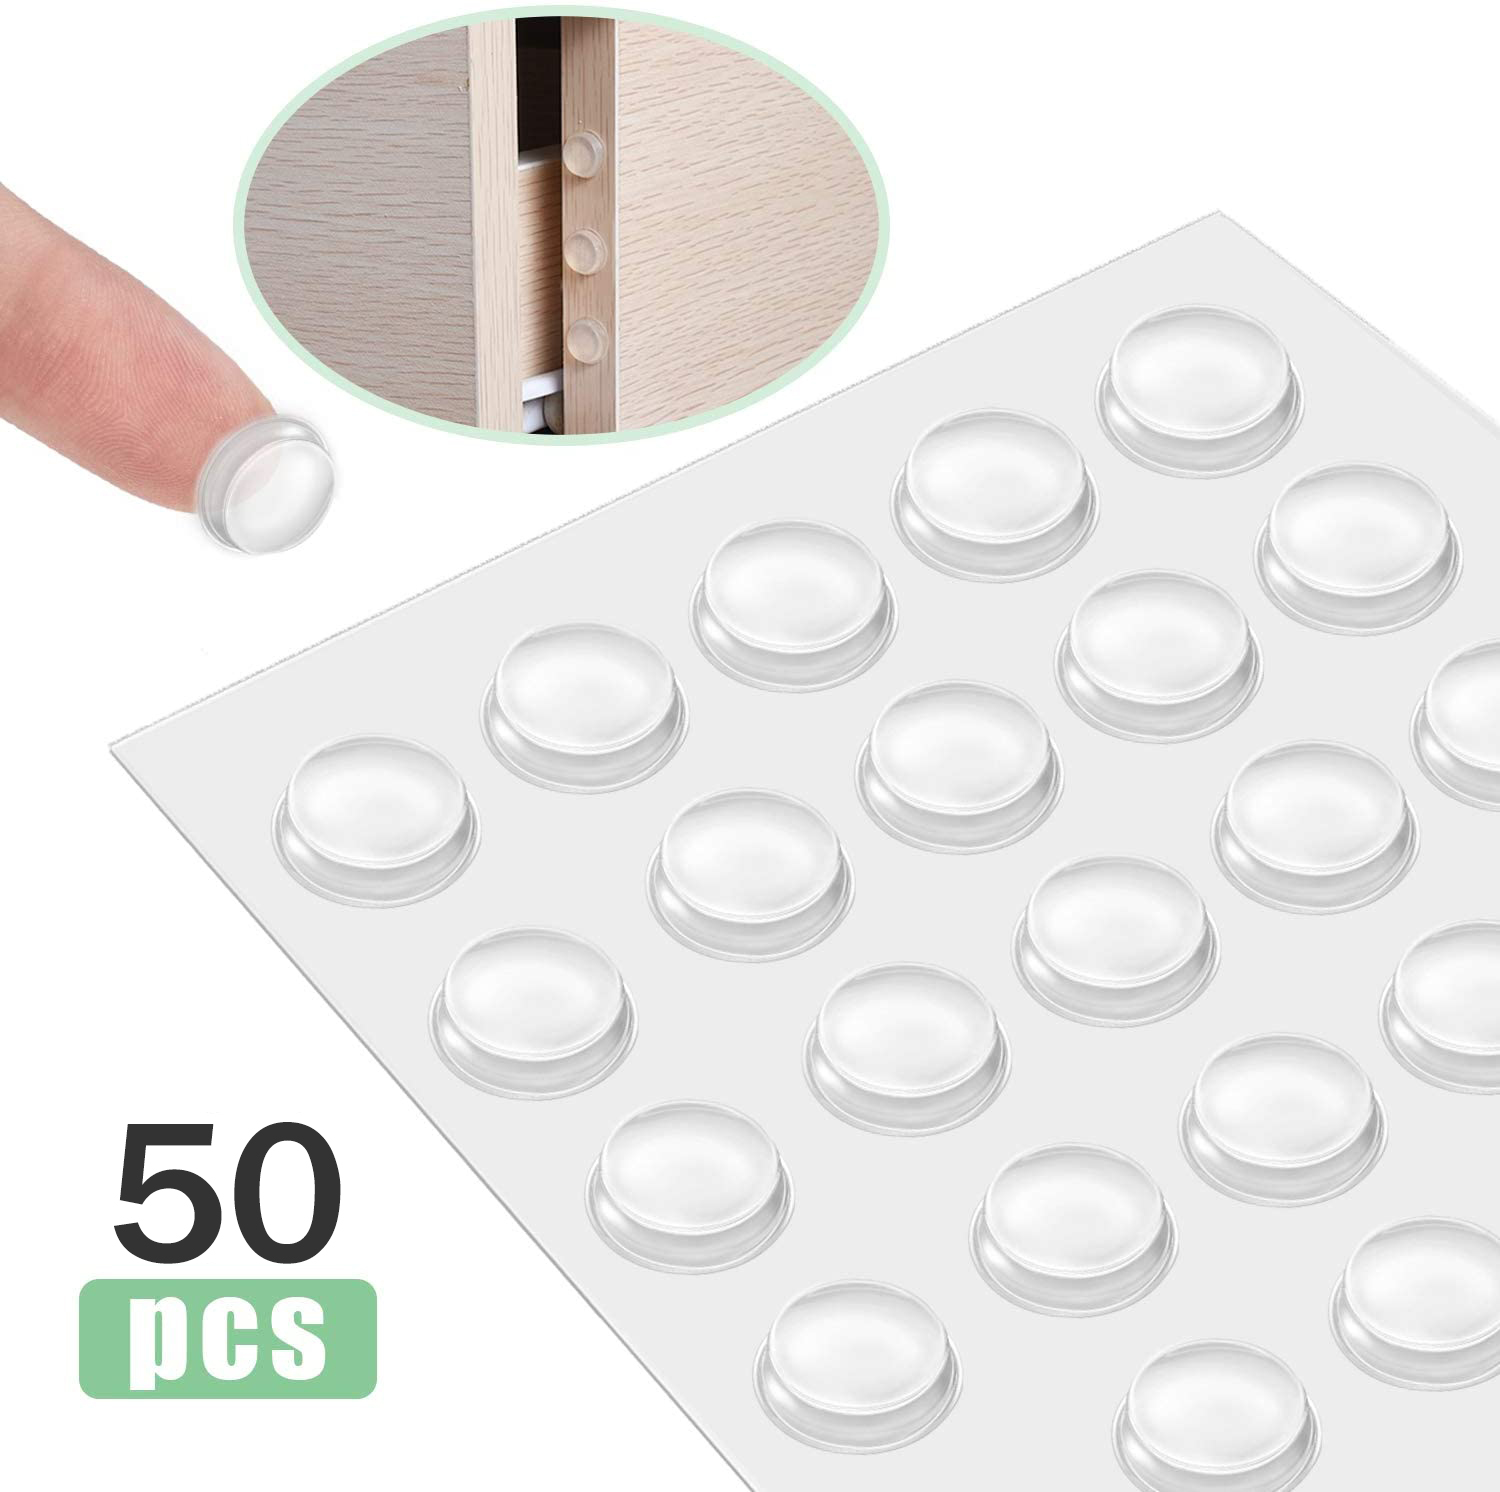 50 Pcs Pack Self Adhesive Clear Cupboard Door Drawer Bumpers /